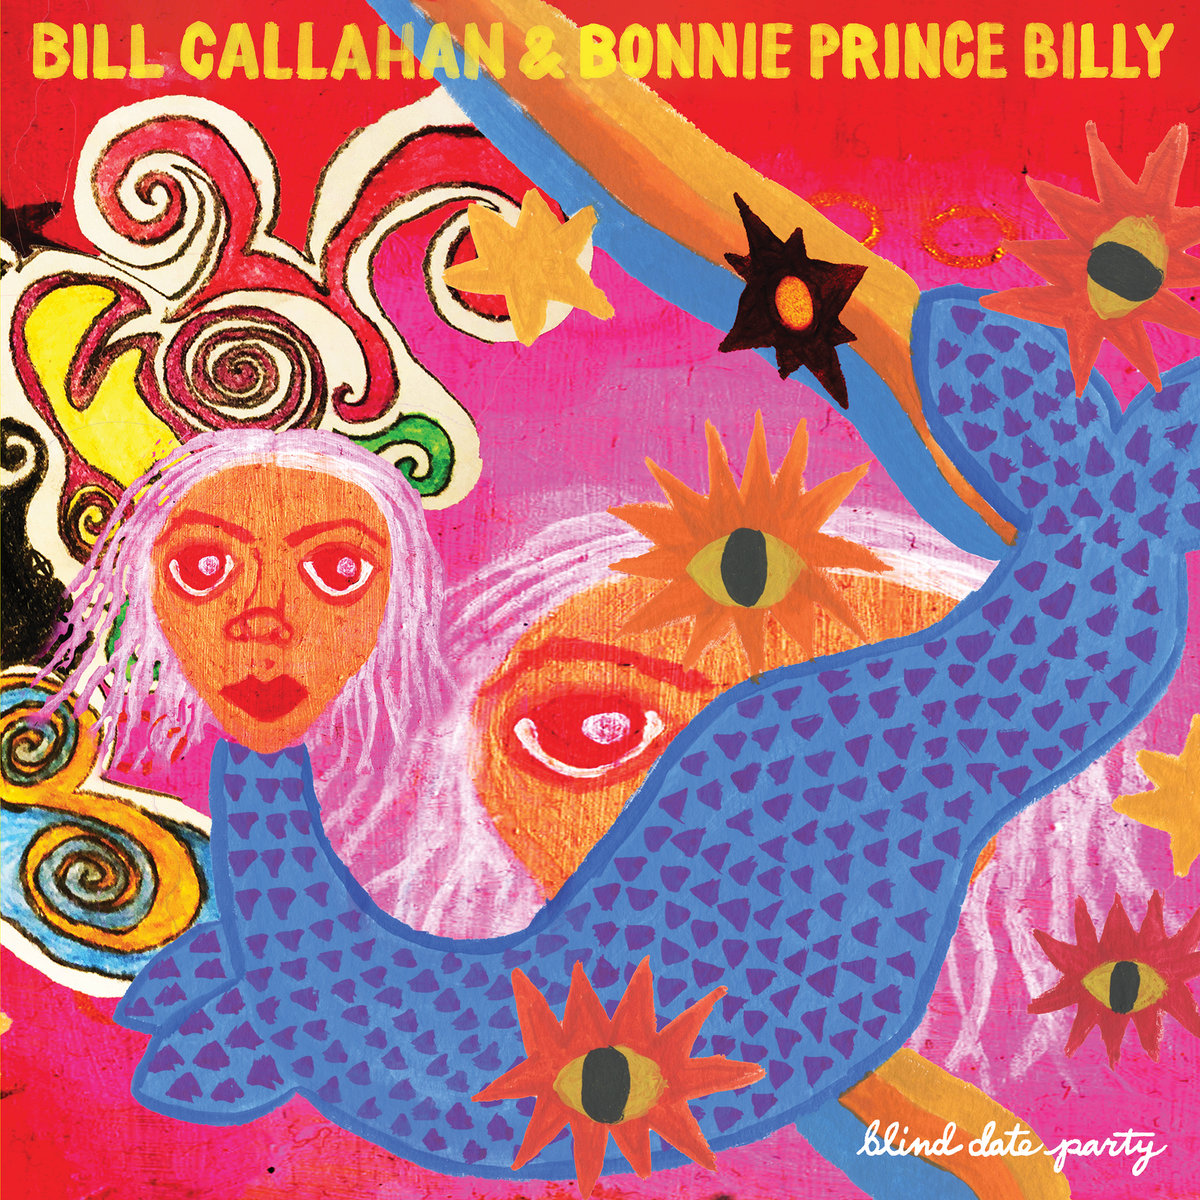 Bill Callahan & Bonnie "Prince" Billy Blind Date Party 